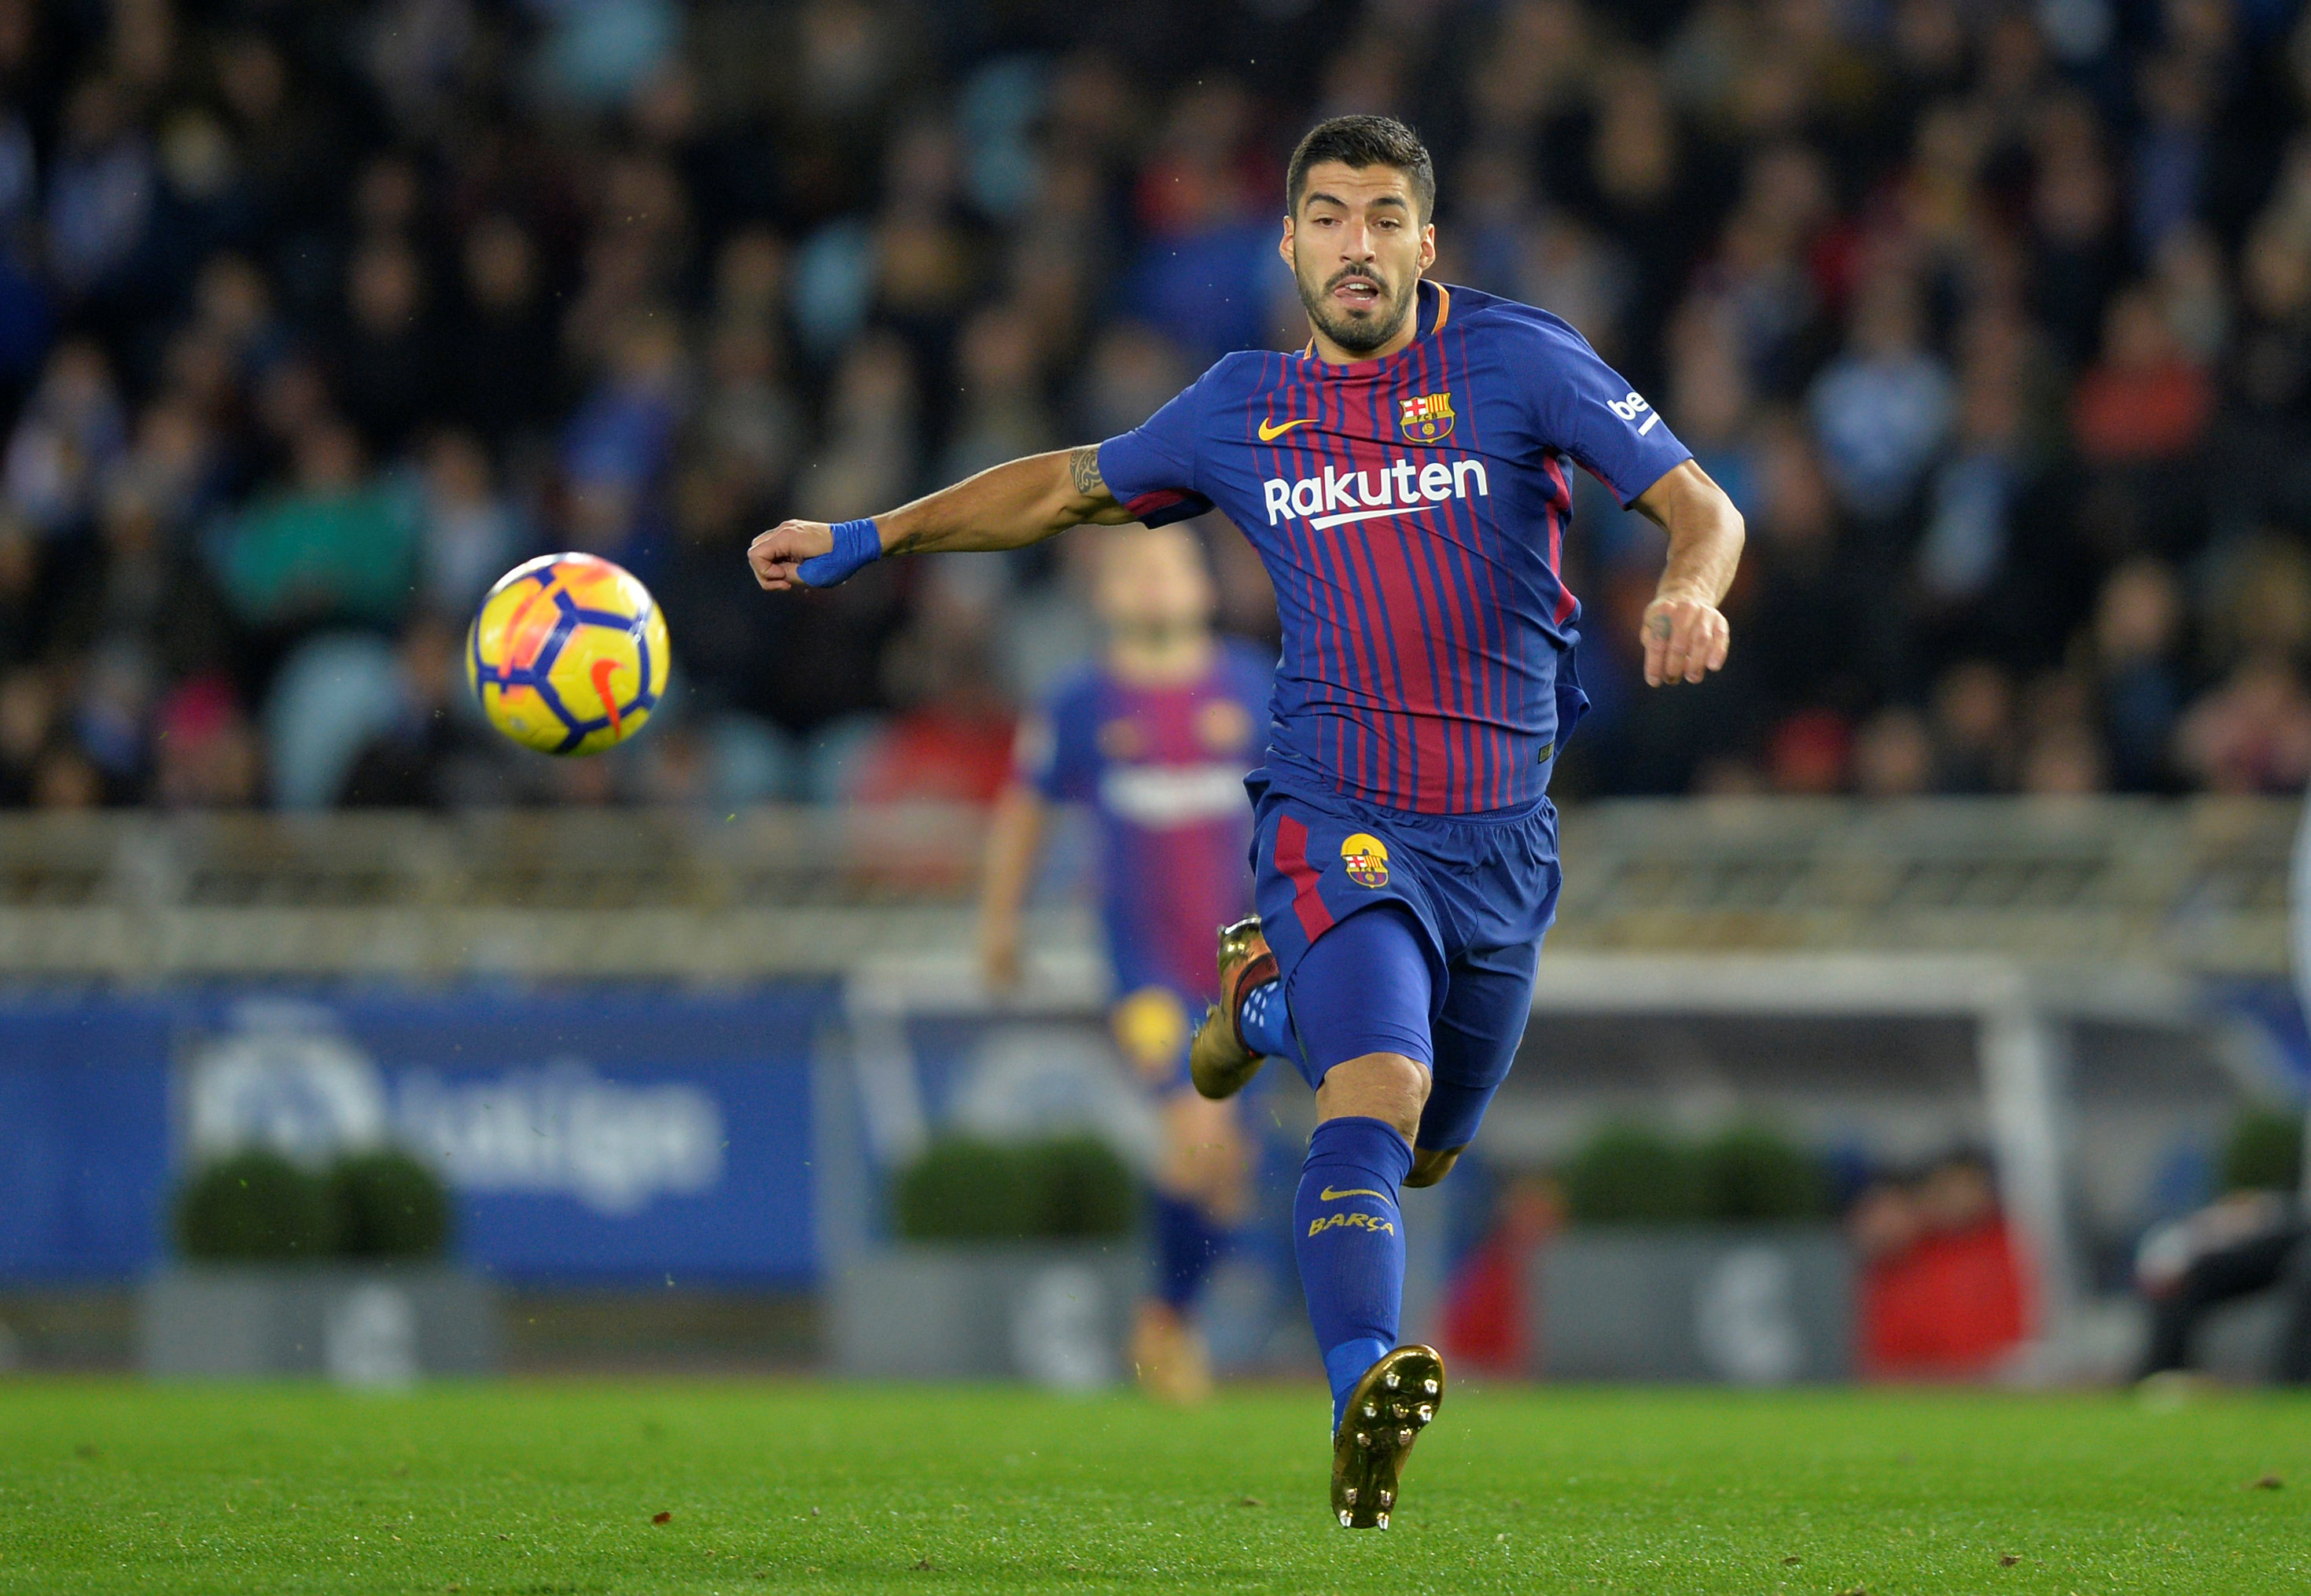 Football: Suarez back to his lethal best after hitting Barca nadir